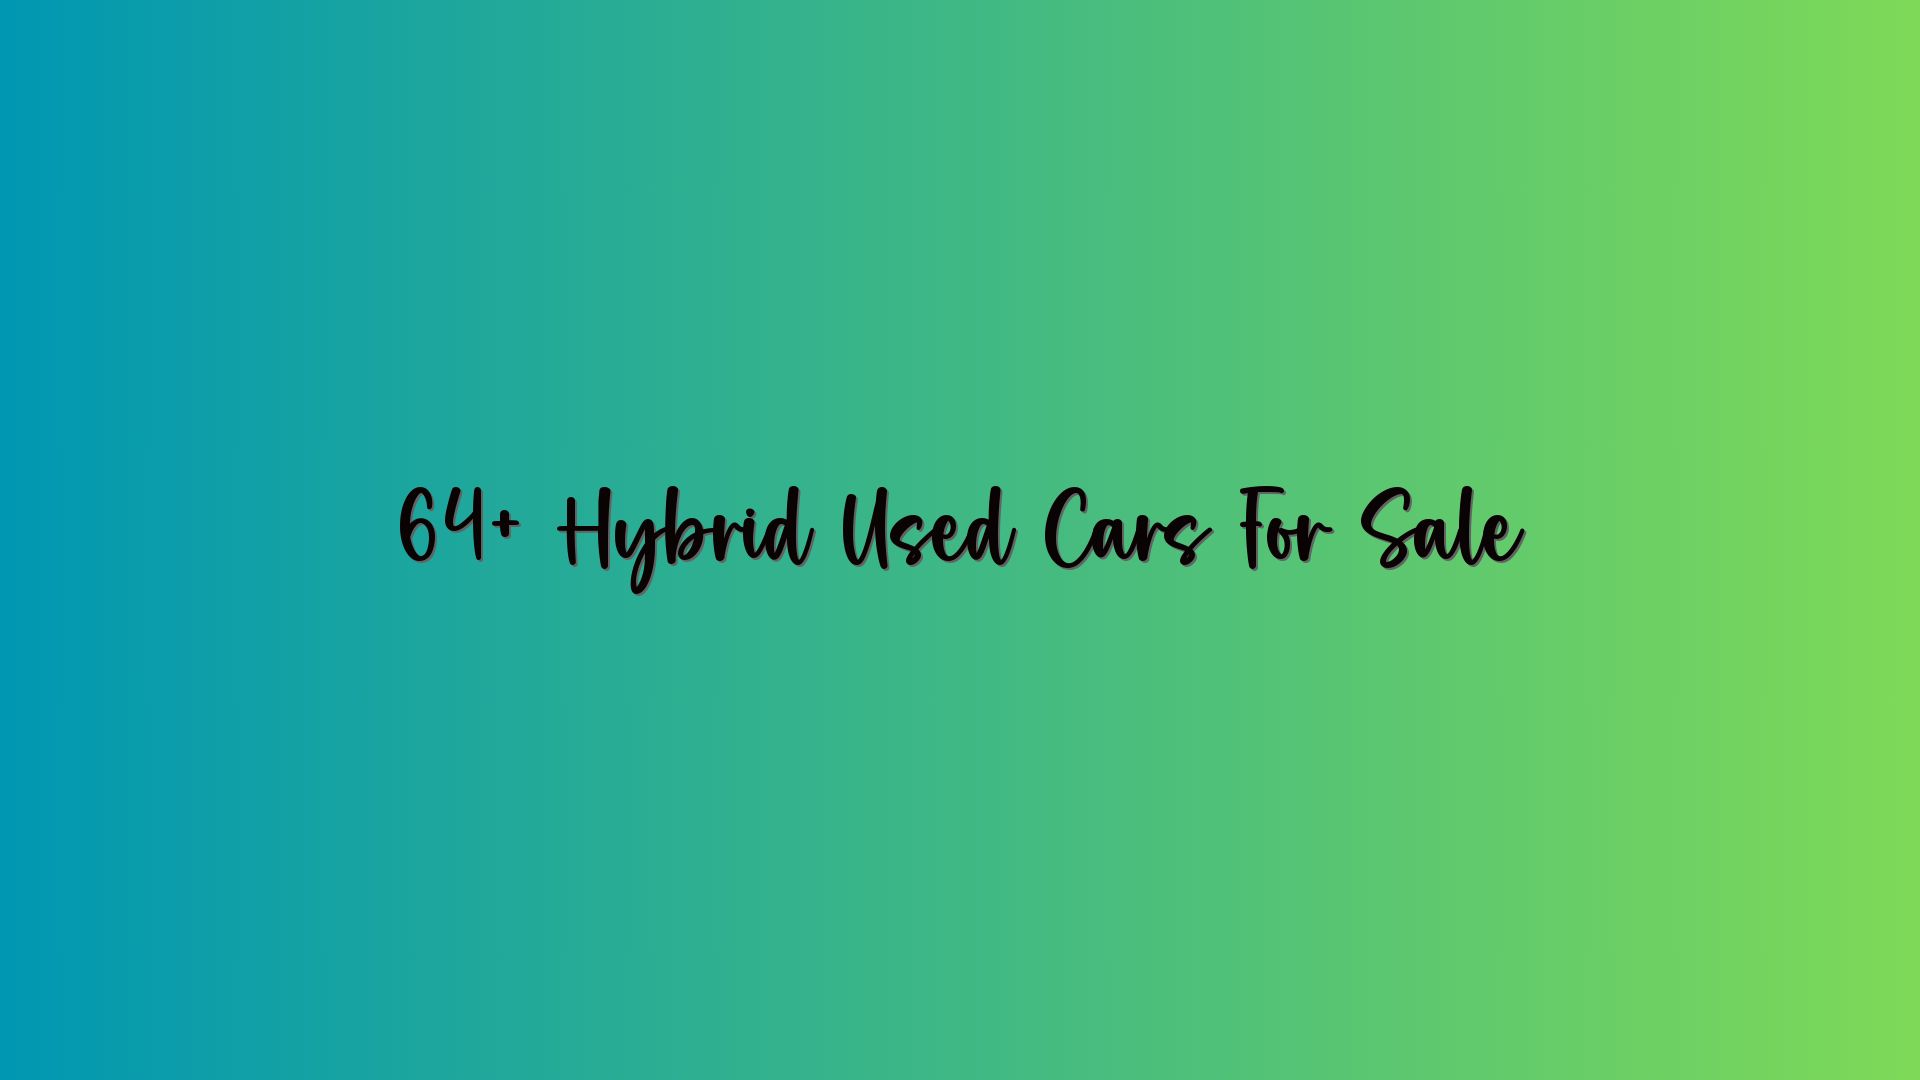 64+ Hybrid Used Cars For Sale